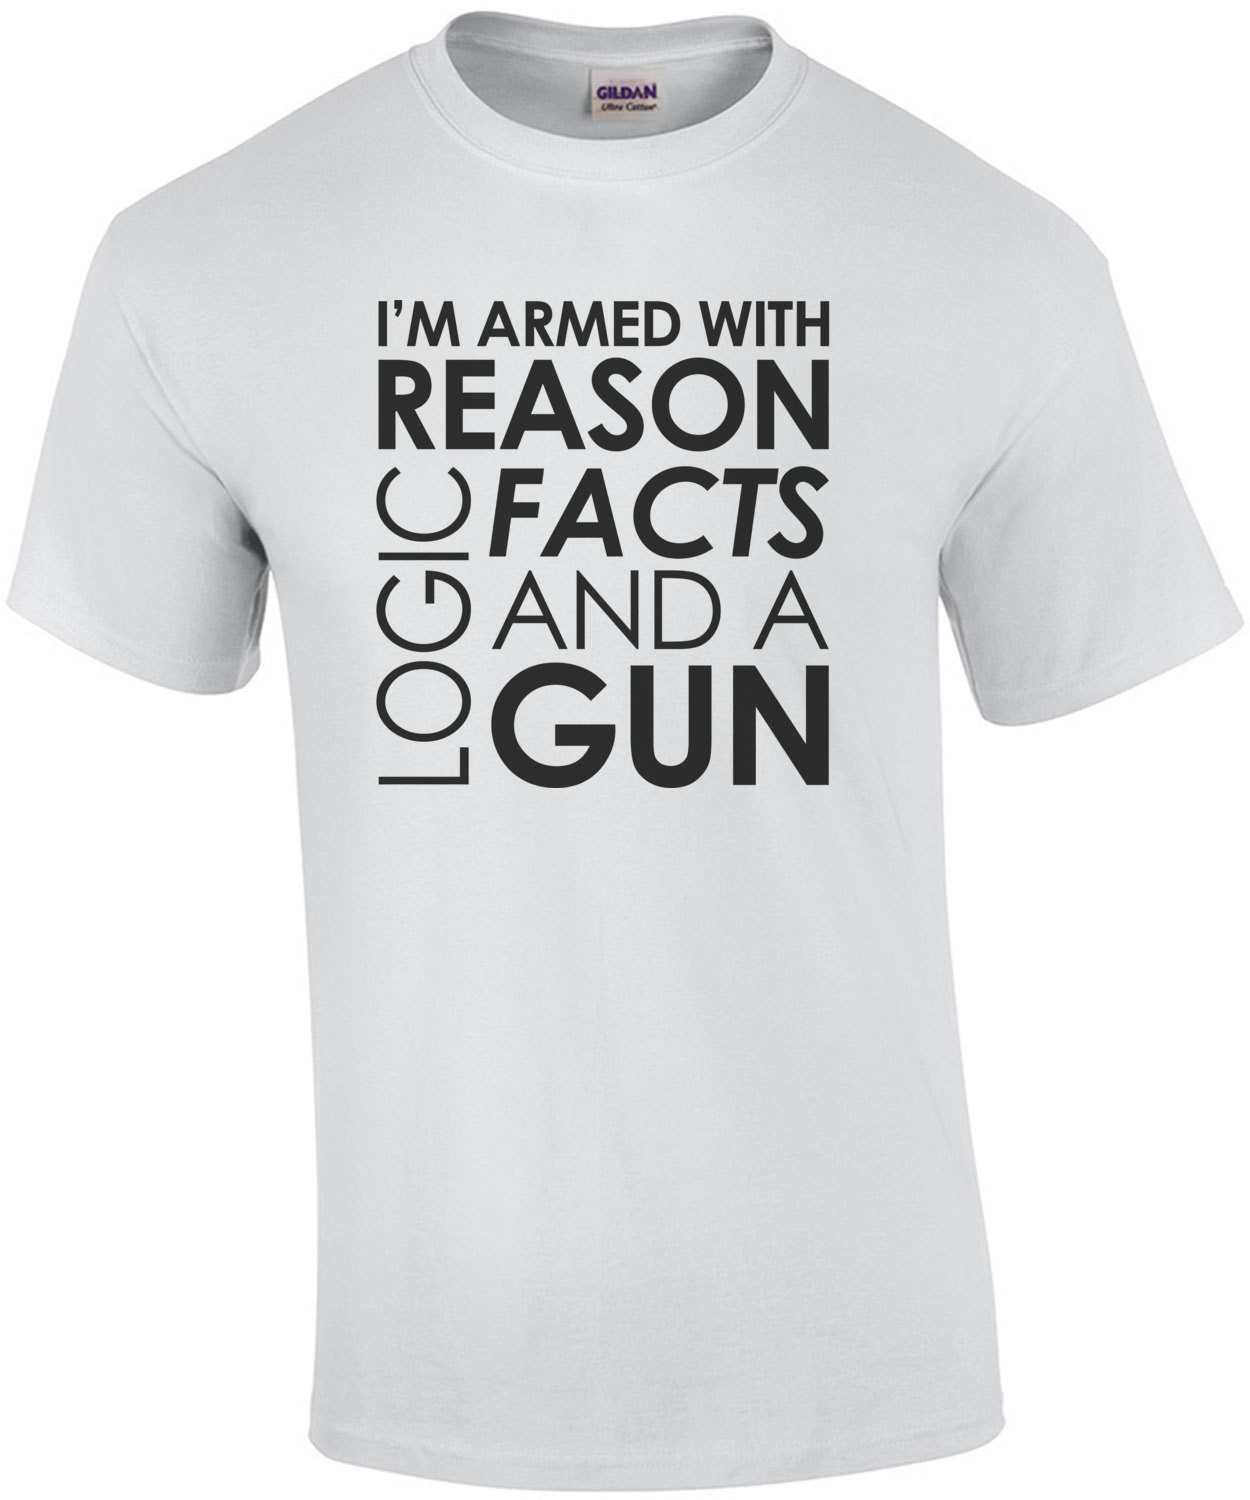 I'm armed with reason logic facts and a cop - pro gun t-shirt